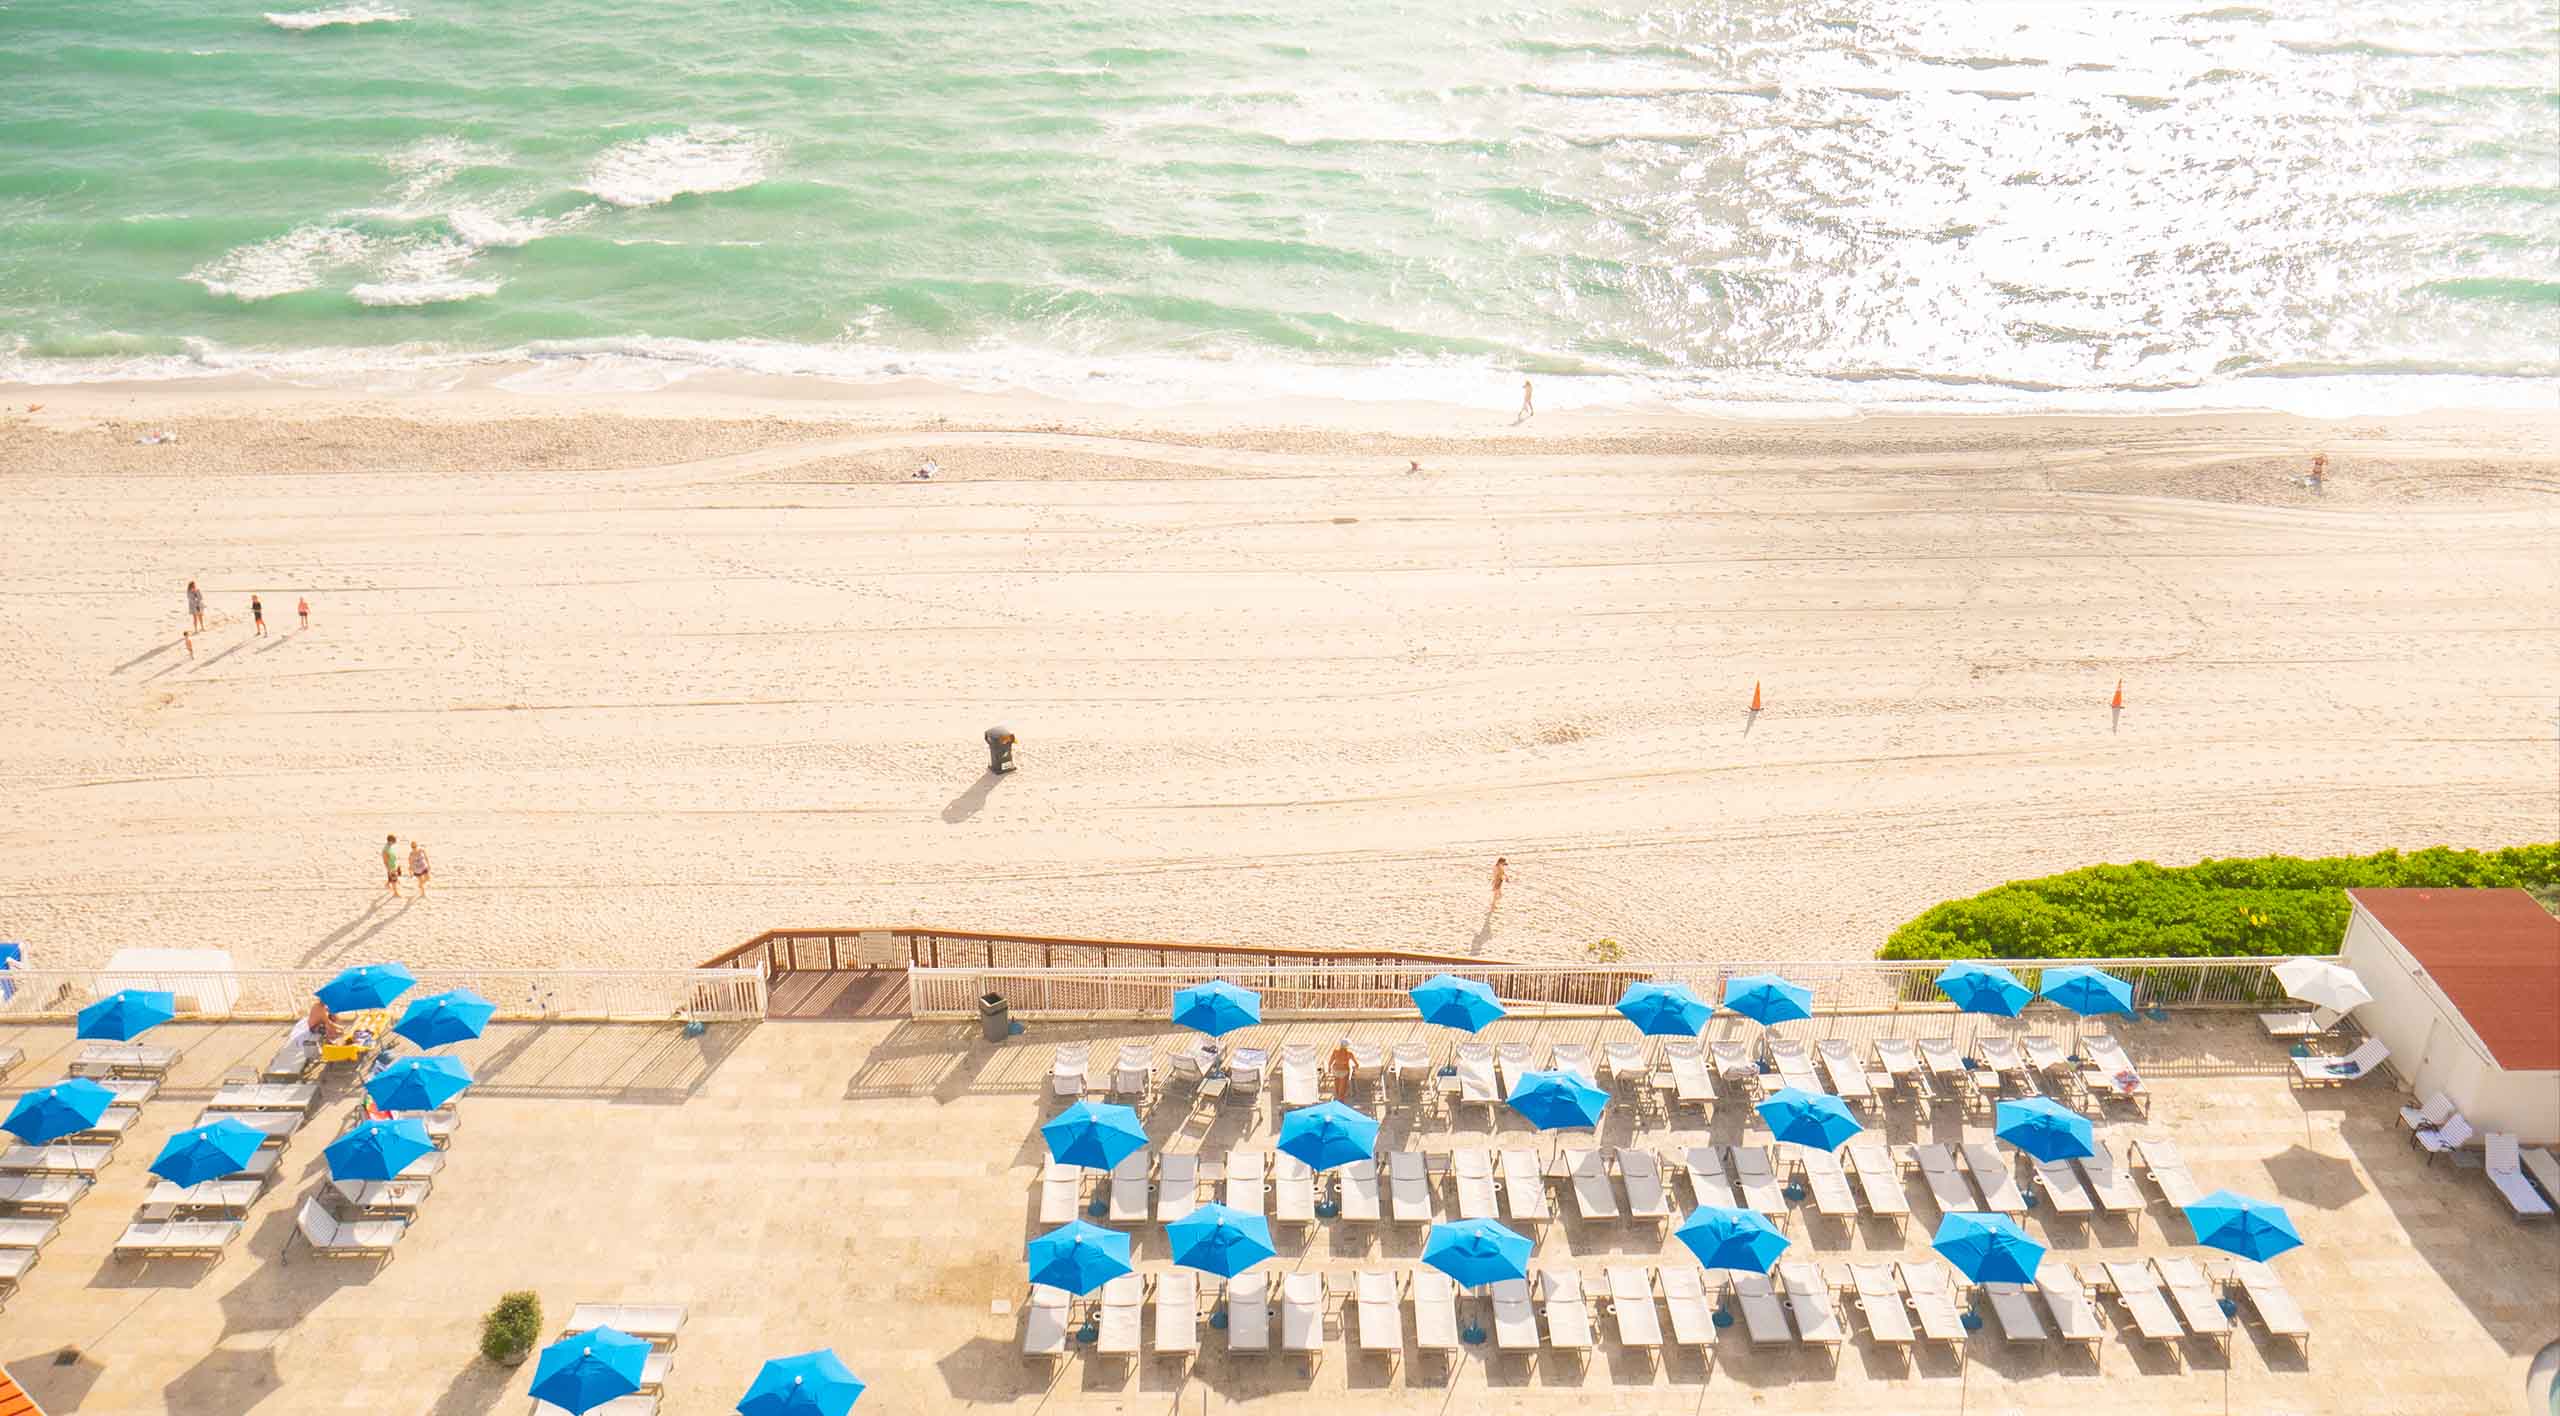 Marco Polo Hotel & Resort Aerial View from Sunny Isles Beach